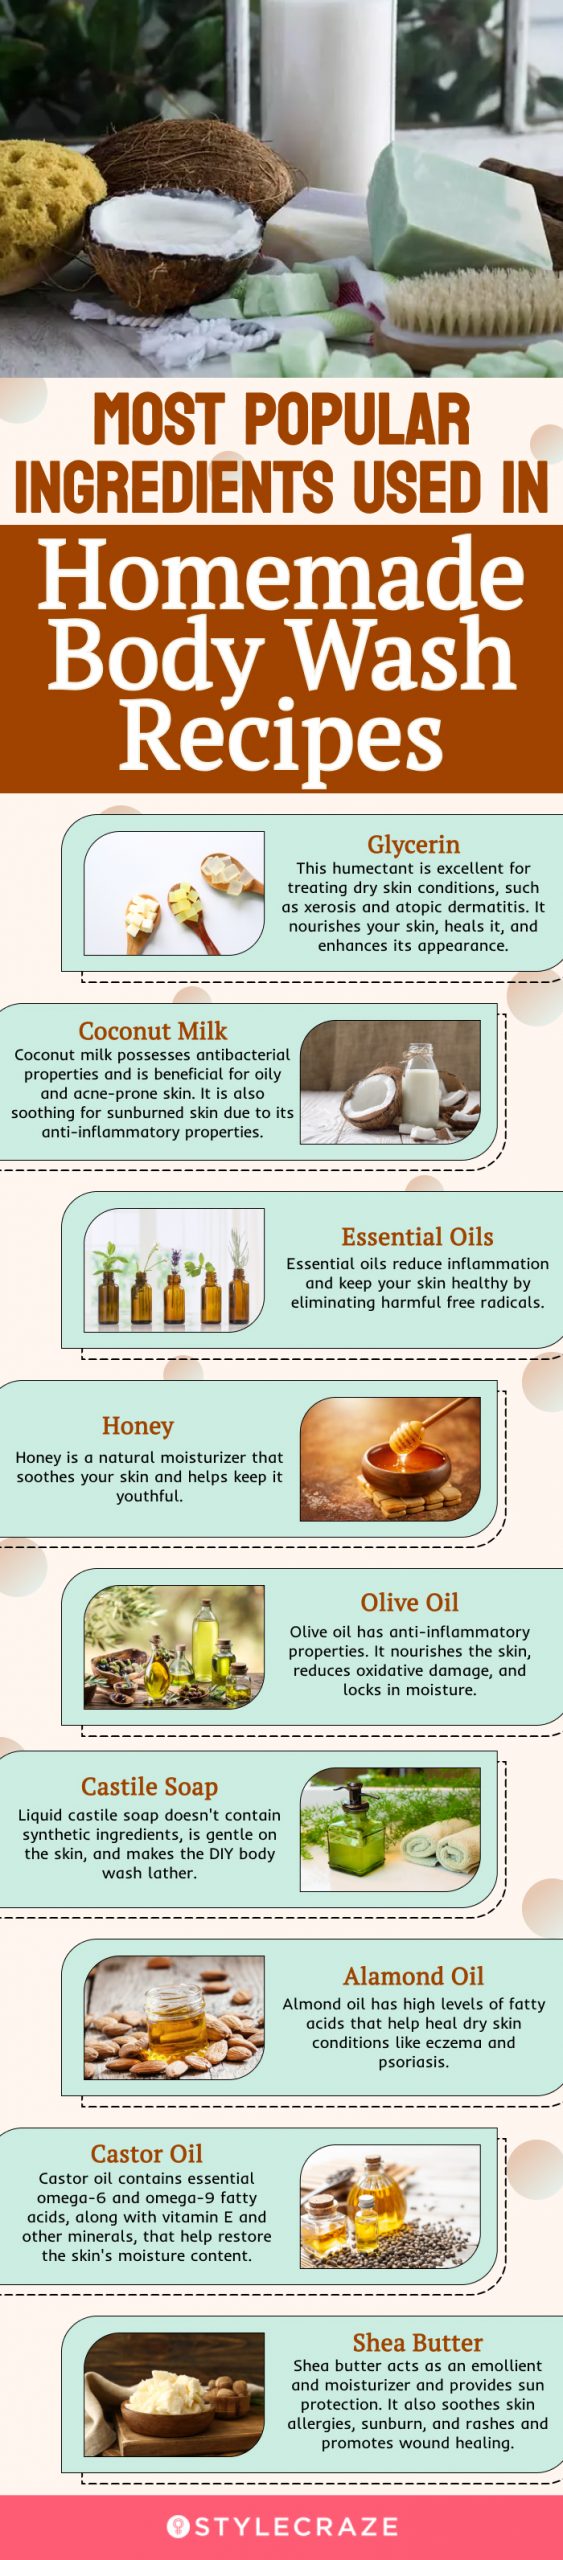 most popular ingredients used in homemade body wash recipes (infographic)